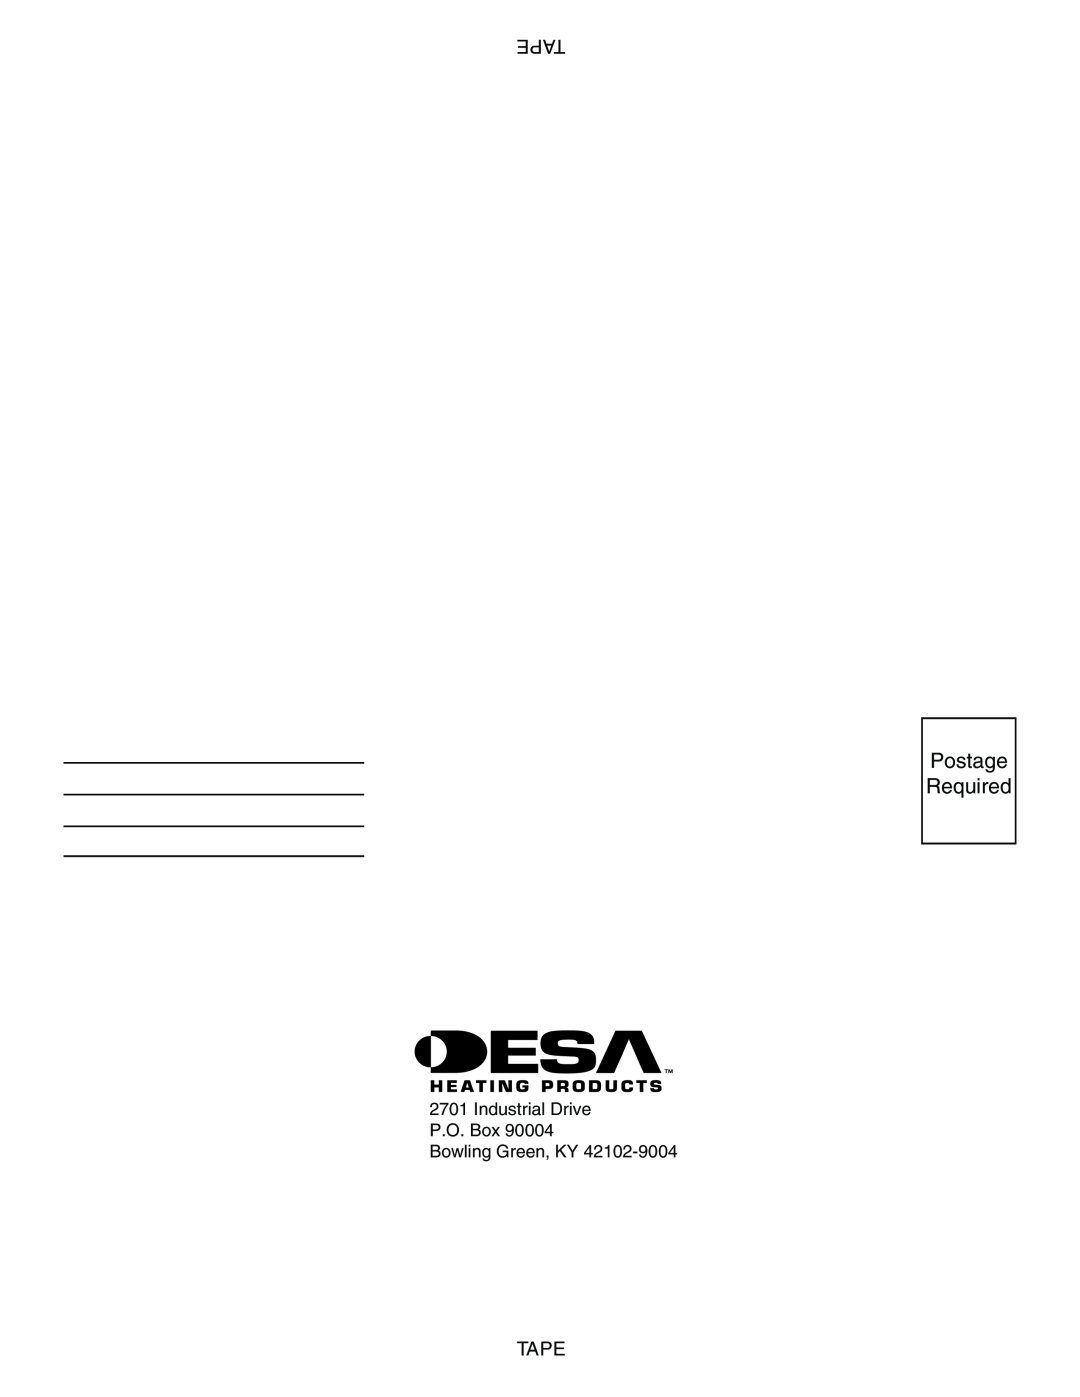 Desa CSPIPT, CSPBPT CSPINT, CSBNT Postage Required, For..com, Tape, Industrial Drive P.O. Box Bowling Green, KY, 111487-01C 